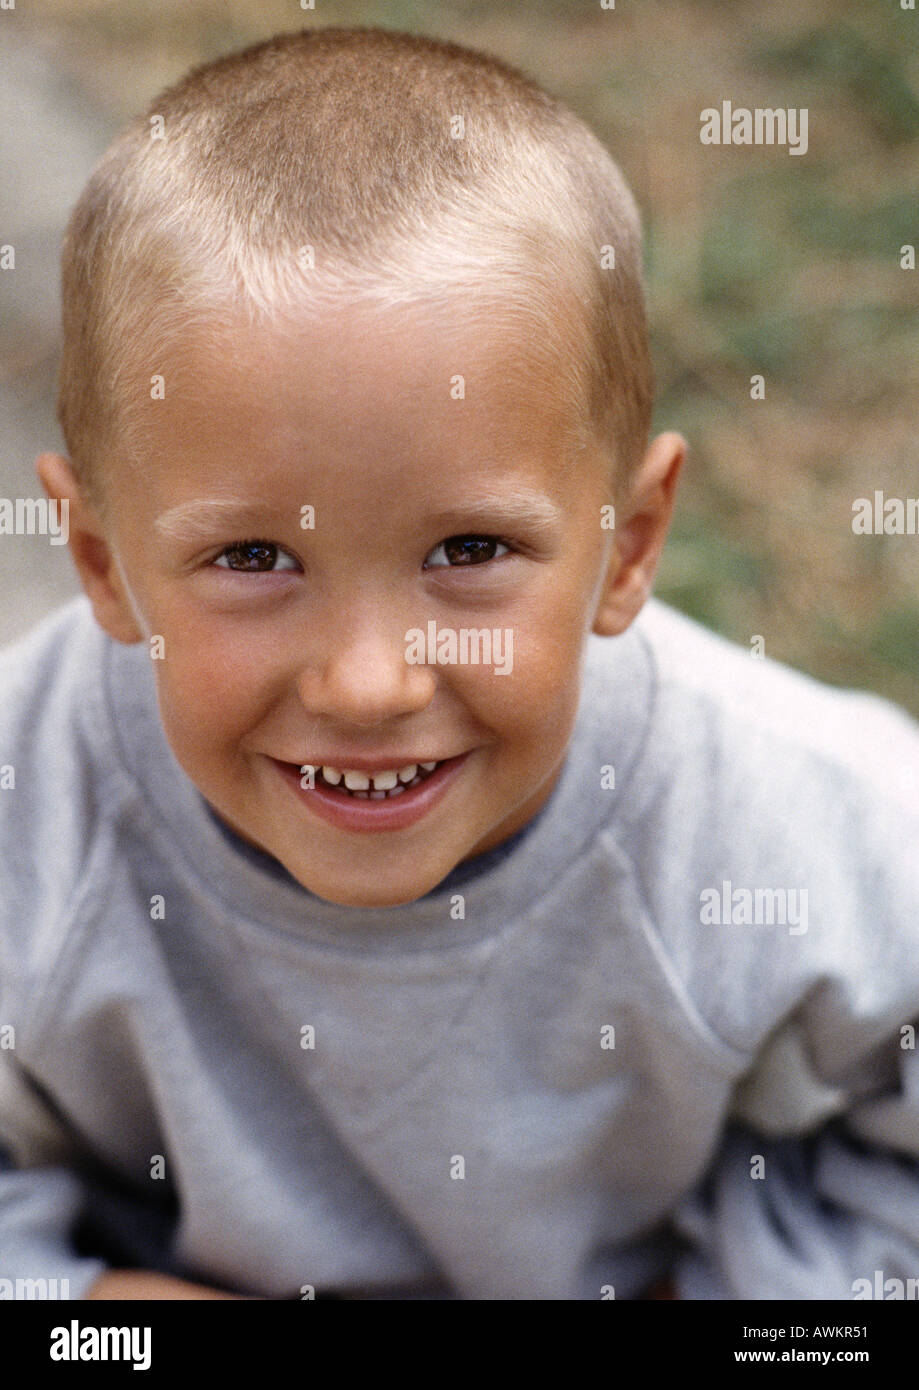 Young boy with short fair hair, wearing grey sweatshirt, smiling, high angle view, portrait Stock Photo